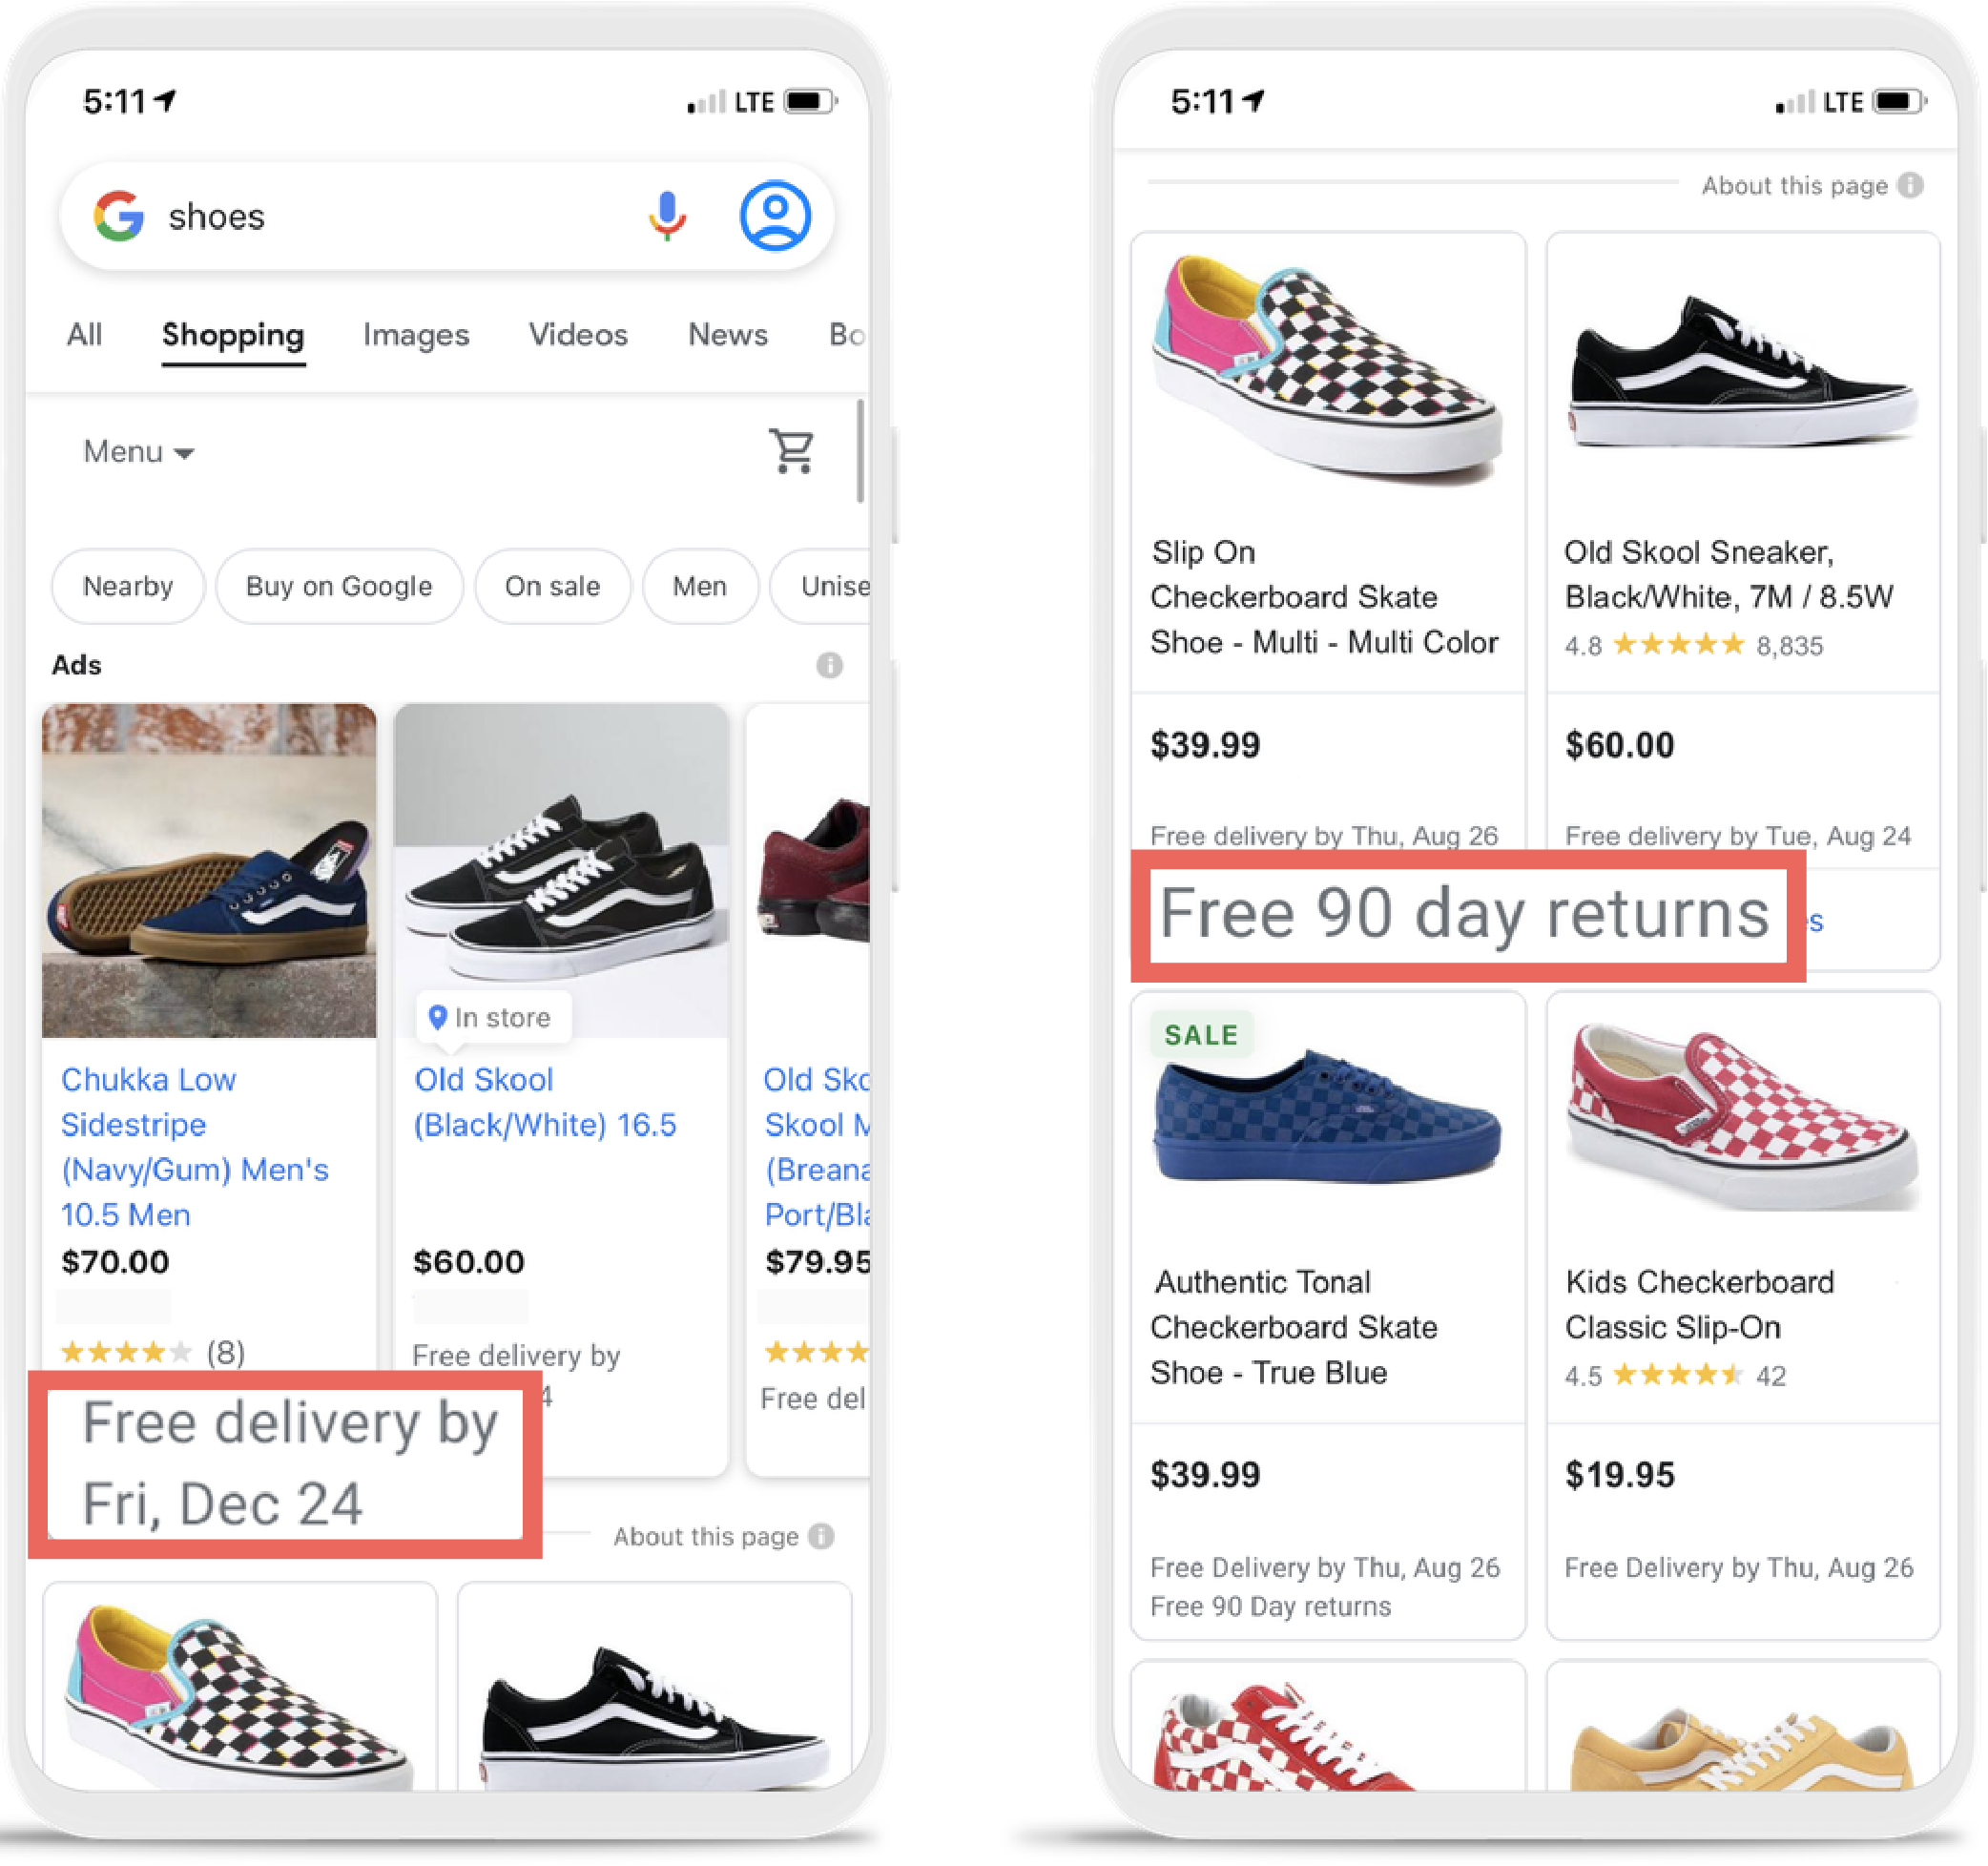 The image shows examples of Google Shopping with the search query "shoes". Here, the new awards from Google are highlighted in red. These can contain, for example, extended return periods or expected delivery date.